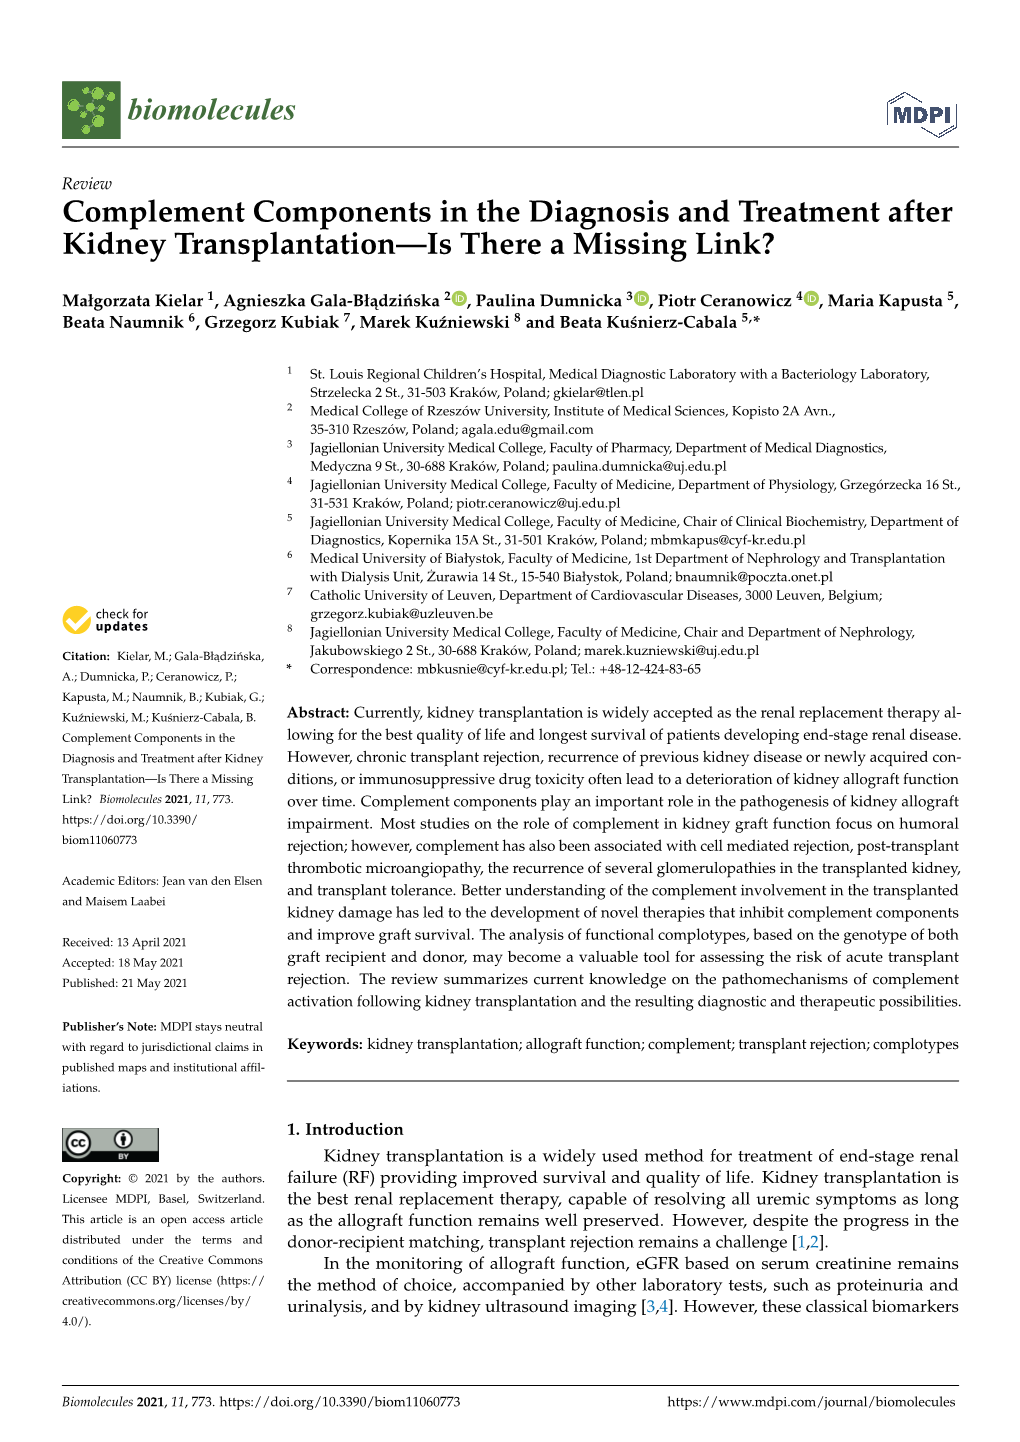 Complement Components in the Diagnosis and Treatment After Kidney Transplantation—Is There a Missing Link?